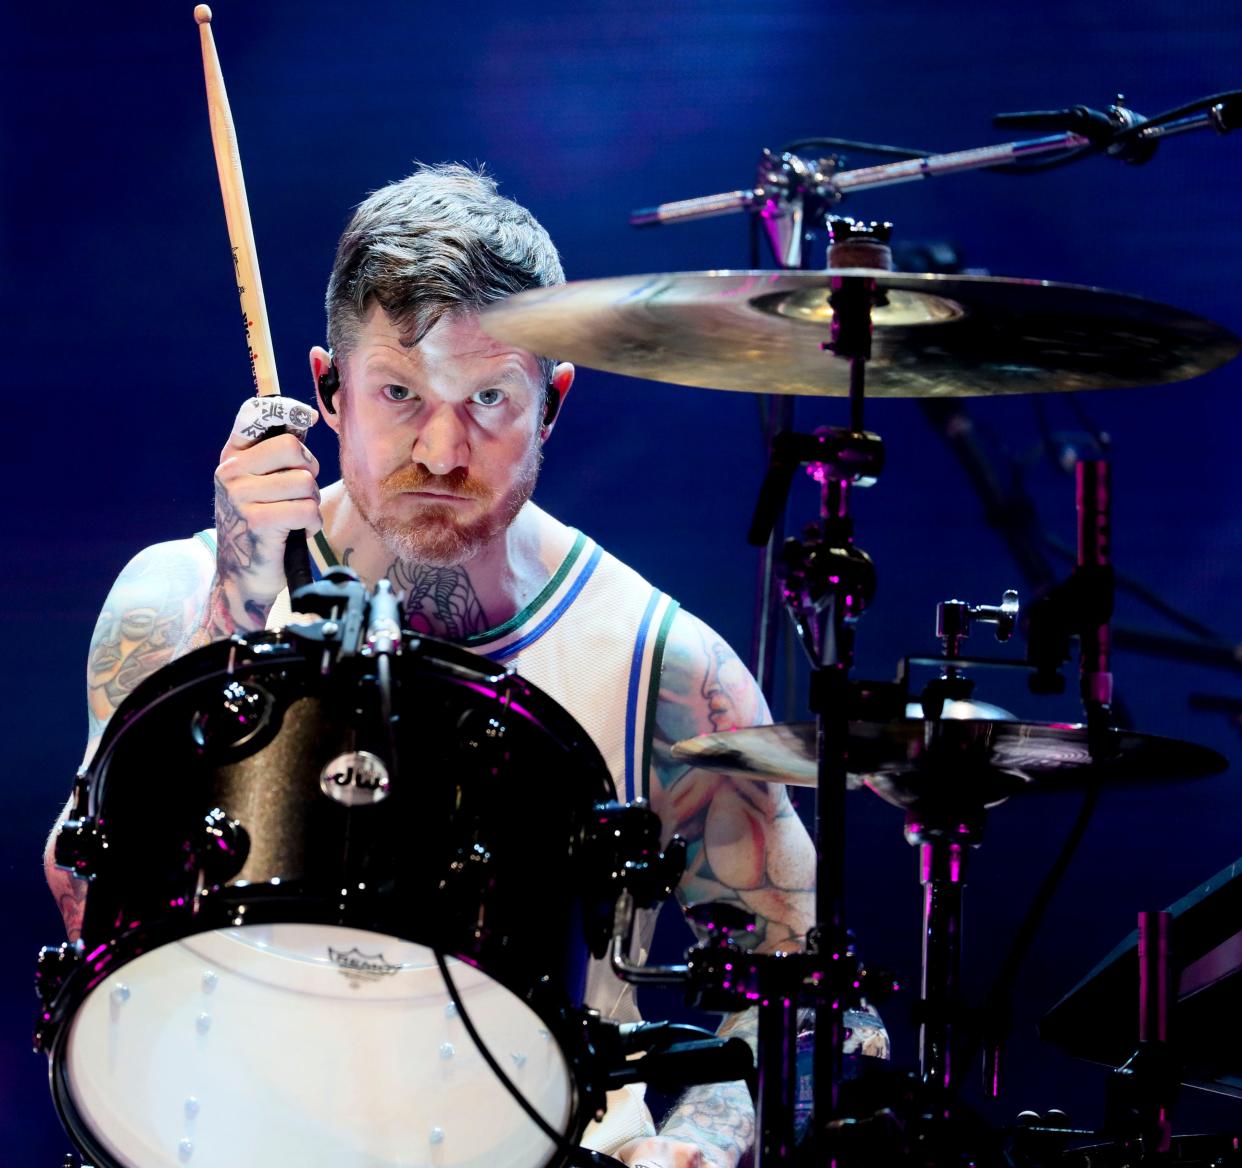 Fall Out Boy drummer Andy Hurley, who's from Menomonee Falls, wears a Giannis Antetokounmpo jersey while performing at the American Family Insurance Amphitheater in 2021. Fall Out Boy will headline Fiserv Forum on April 2.